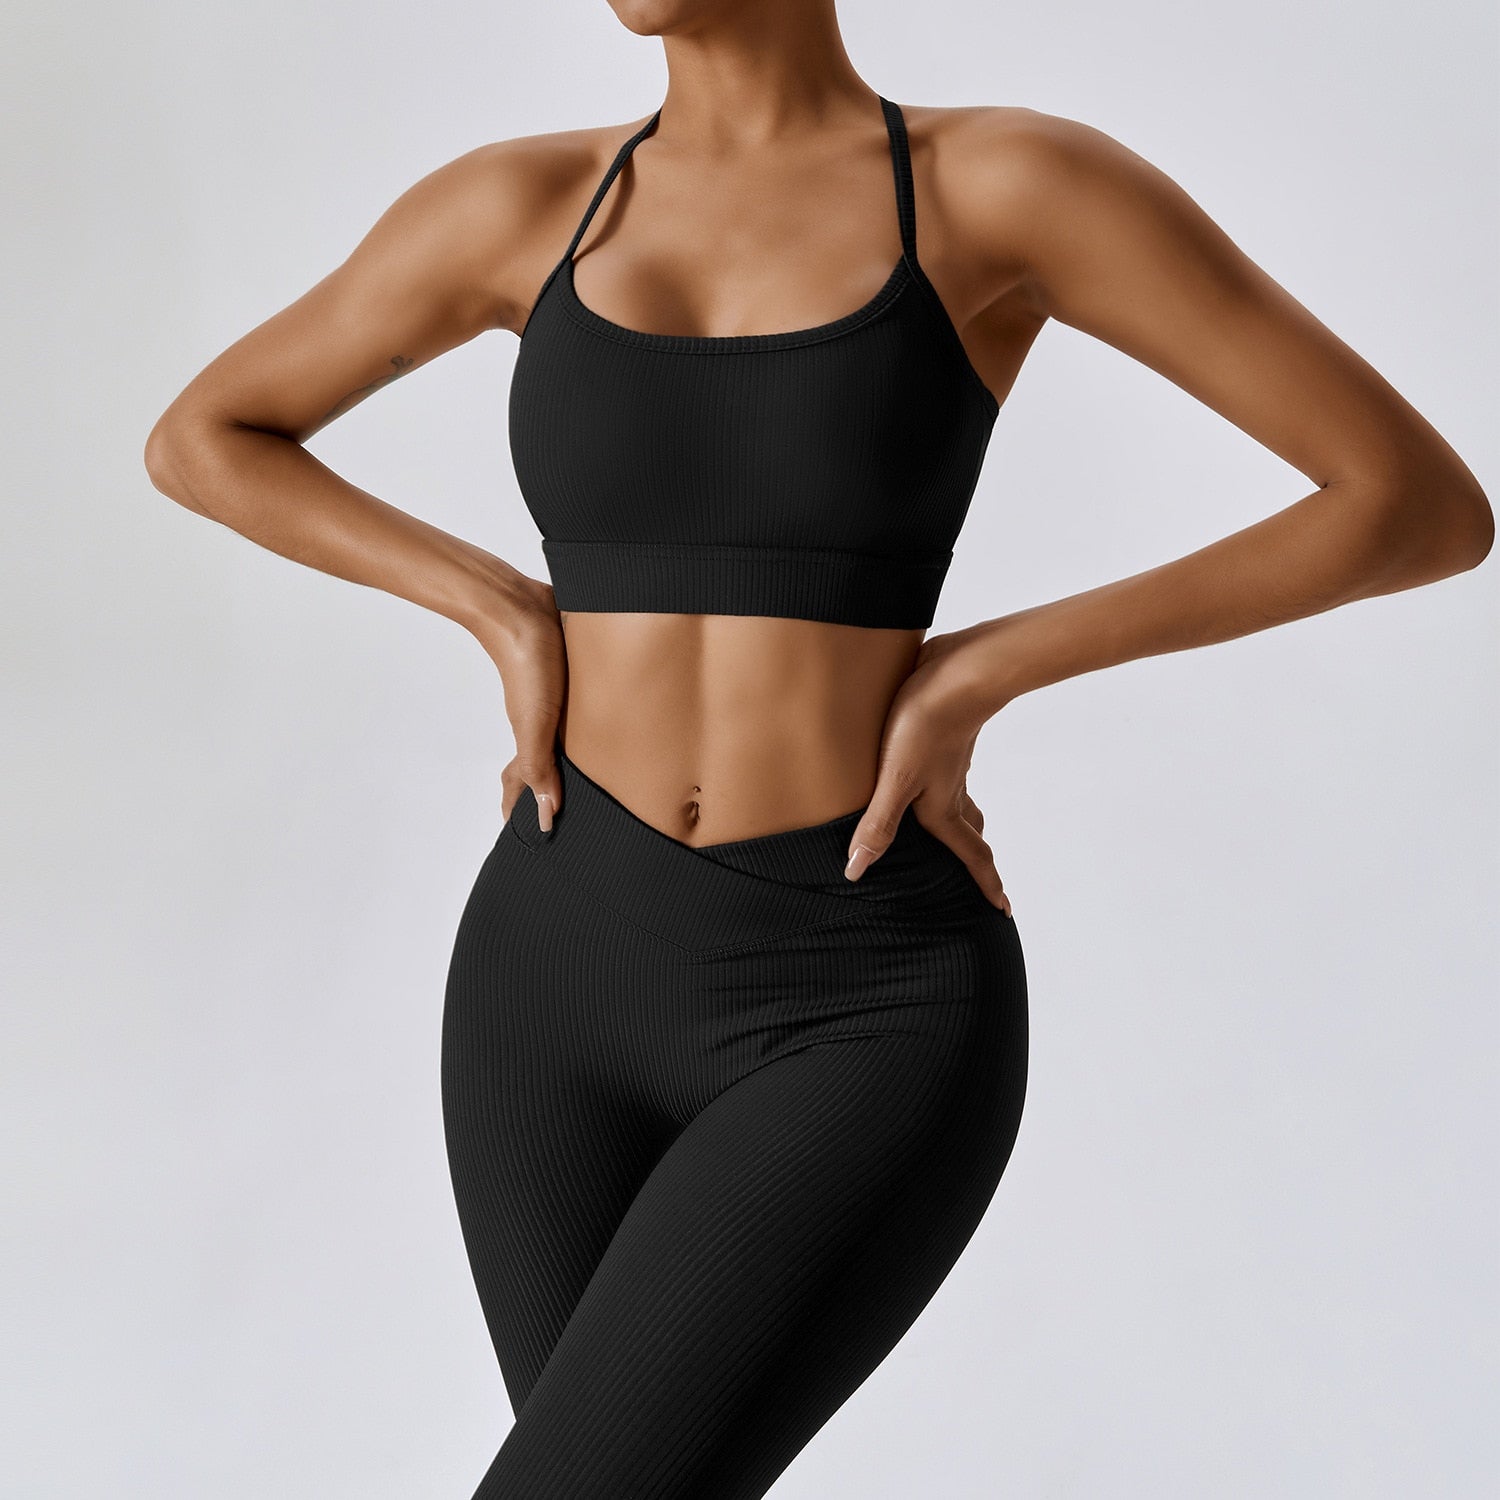 Ribbed Yoga Set Sportswear Women Suit For Fitness Clothing Sports Suit Workout Clothes Tracksuit Sports Outfit Gym Clothing Wear BlackSet-5XLChina  71.99 EZYSELLA SHOP